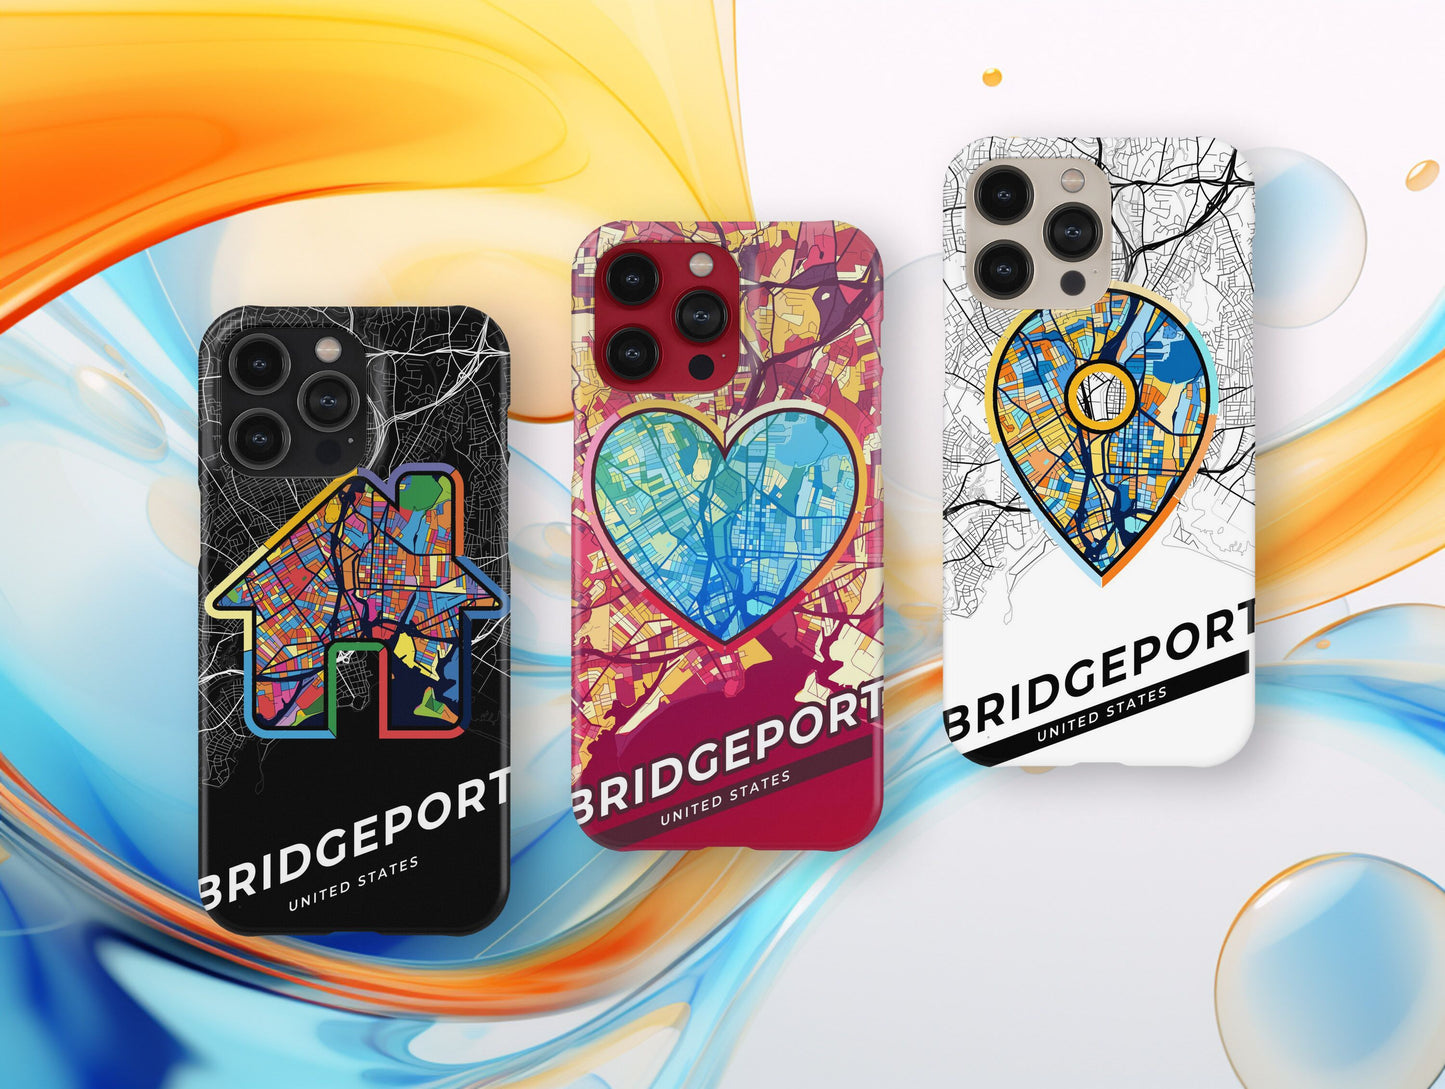 Bridgeport Connecticut slim phone case with colorful icon. Birthday, wedding or housewarming gift. Couple match cases.